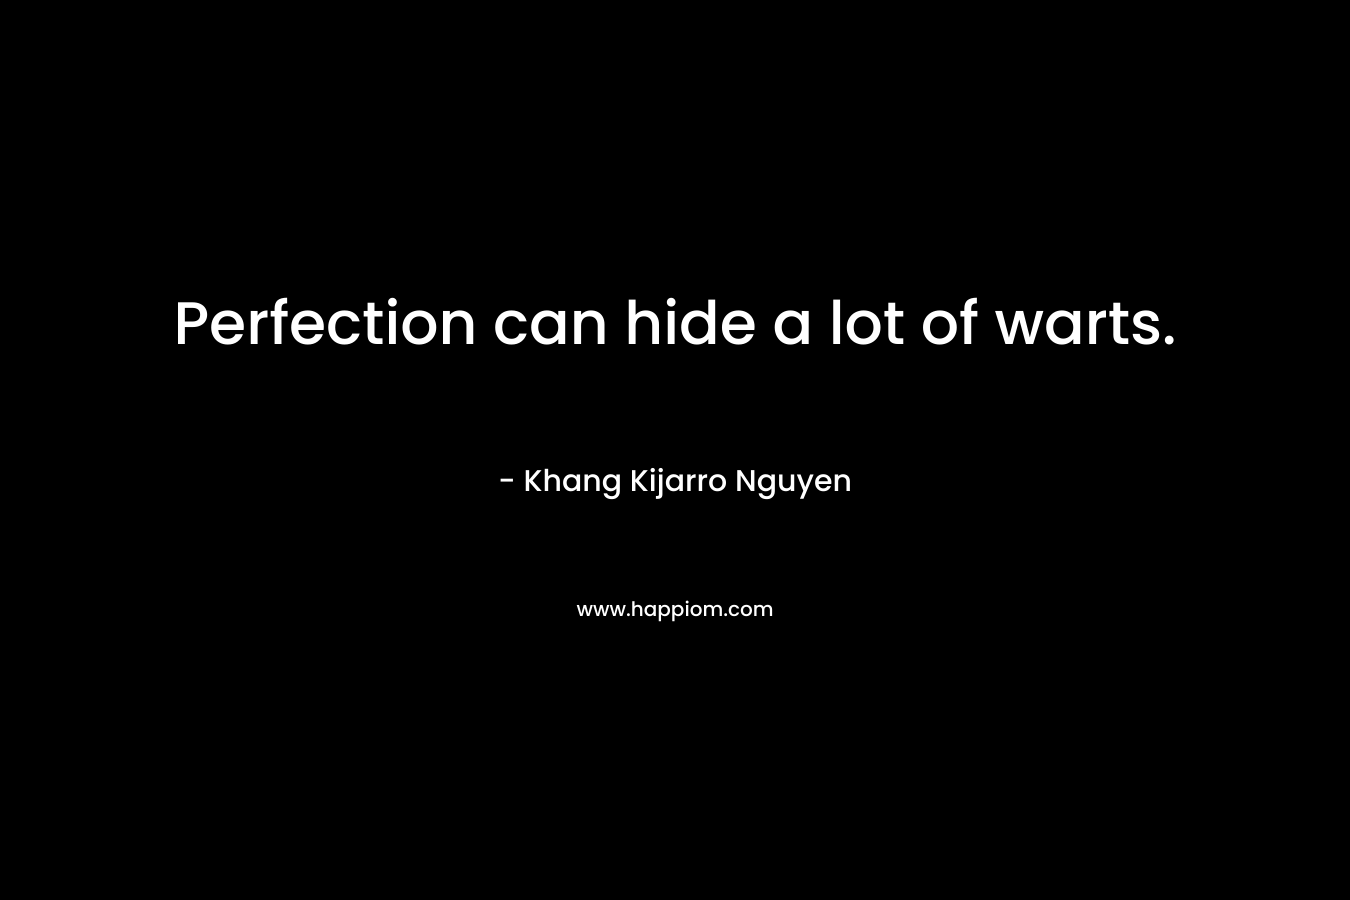 Perfection can hide a lot of warts.